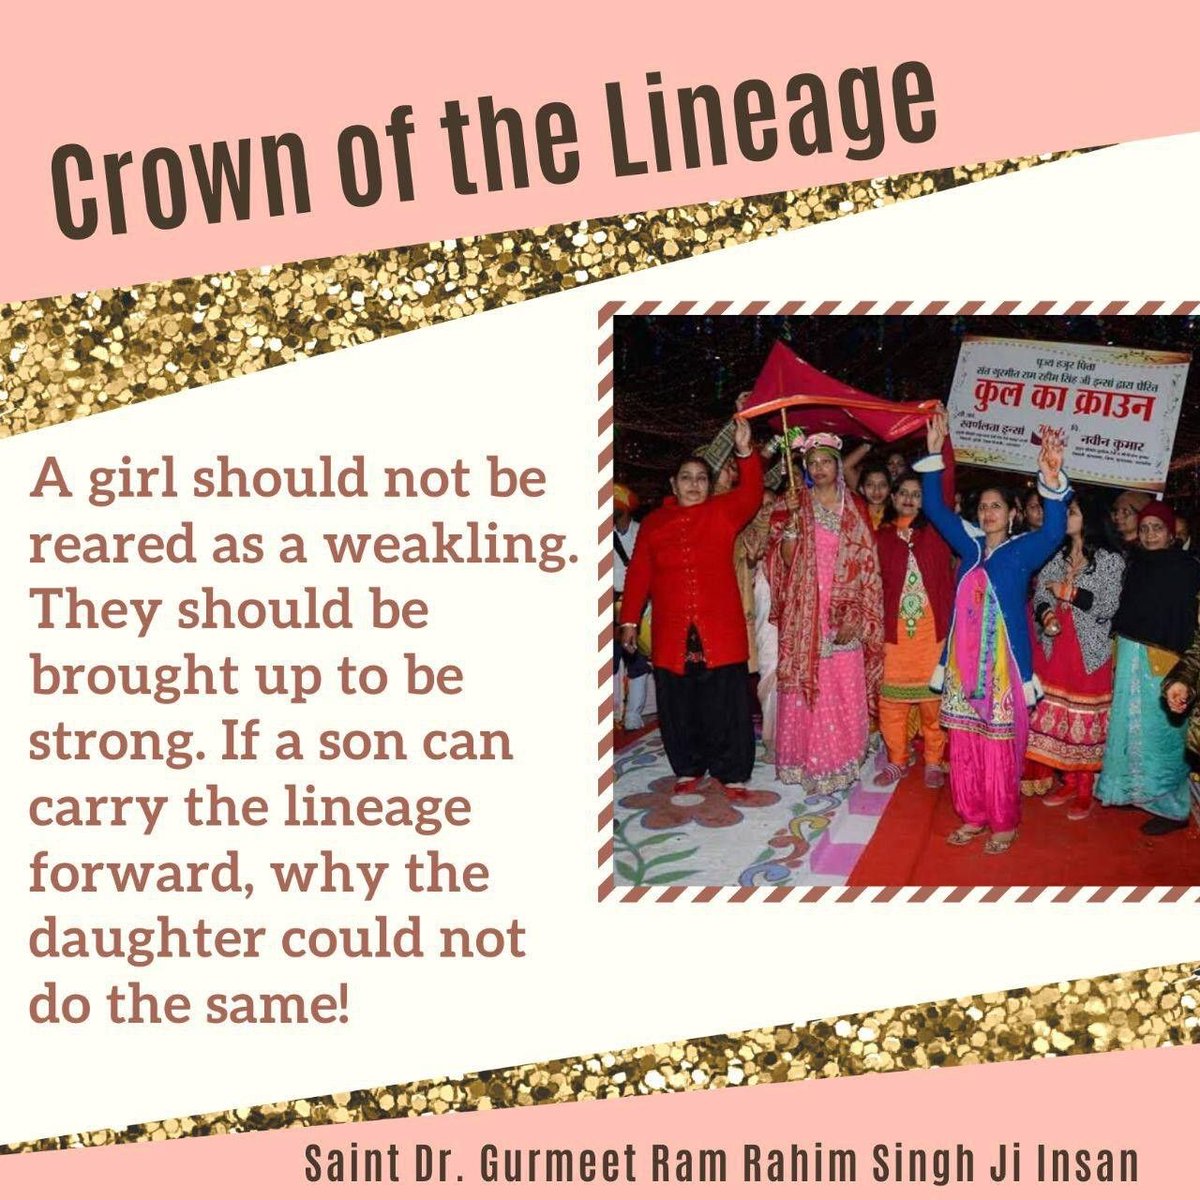 As a part of the 'Kul Ka Crown' initiative, the girl's lineages gets inherited, hence the child born to such a couple would take the surname of girl's family. Hats off to Saint Ram Rahim Ji for starting this unique initiative of Kul Ka Crown. #TheProudDaughters